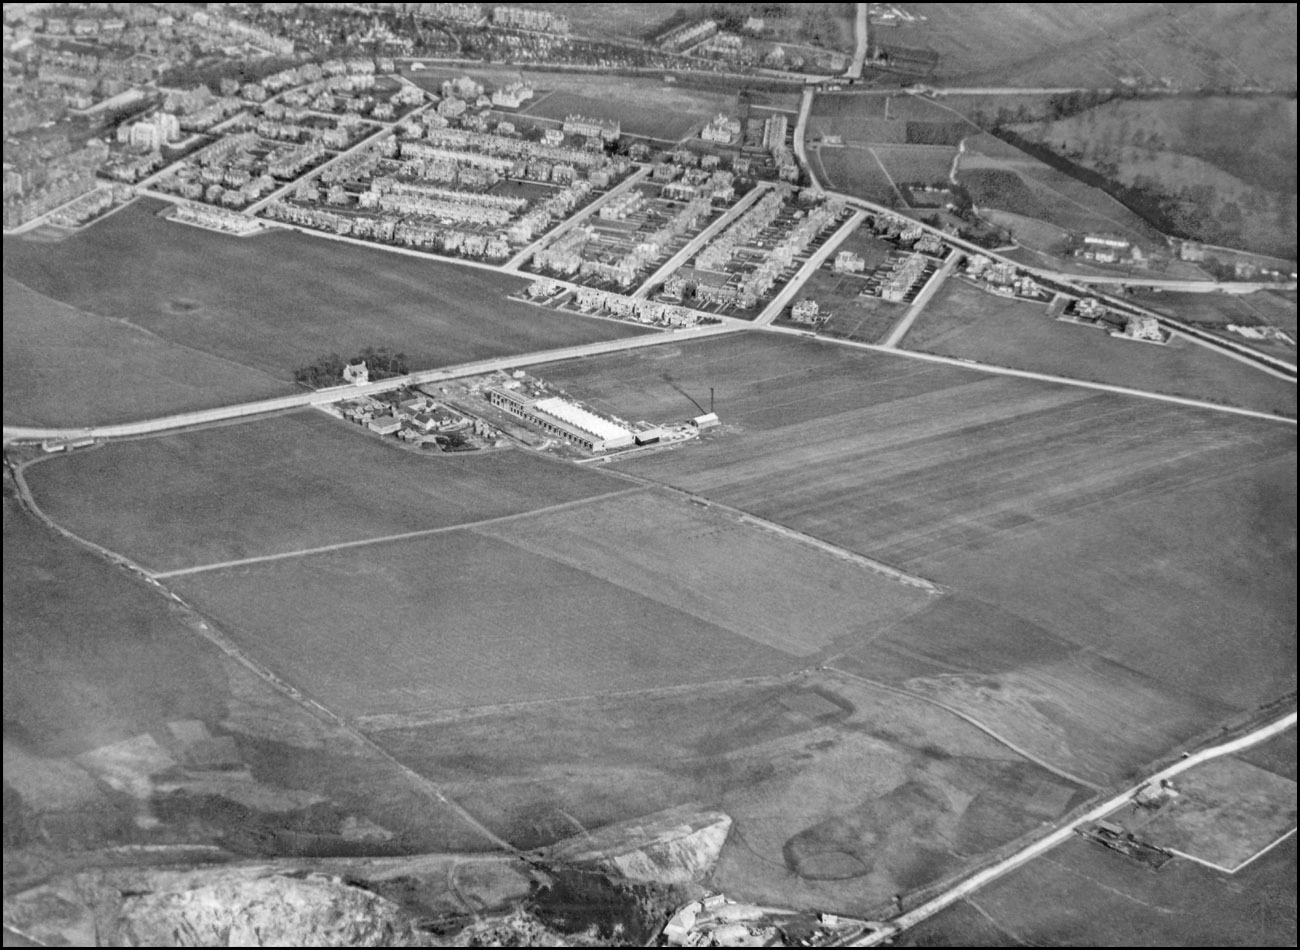 An aerial photograph of The King's Buildings campus in 1921